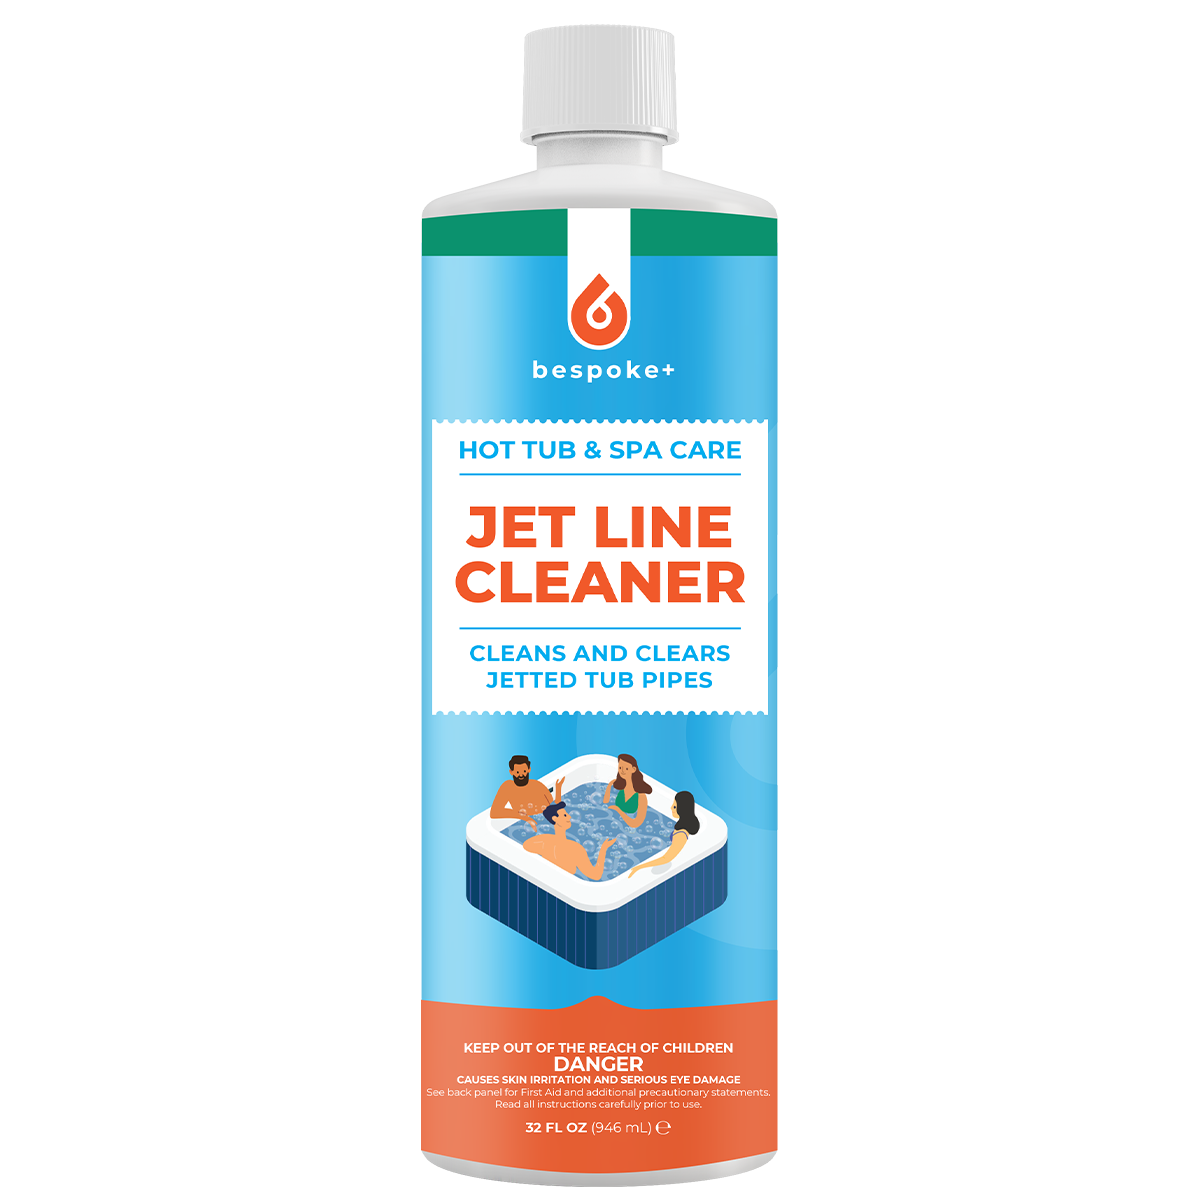 Bespoke+ Spa Jet Cleaner - Hot Tub Flush & Spa Purge Chemical - Fast Acting  Spa Jet Line Cleaner for Hot Tubs & Jetted Tub Cleaner - Bathtub Jet